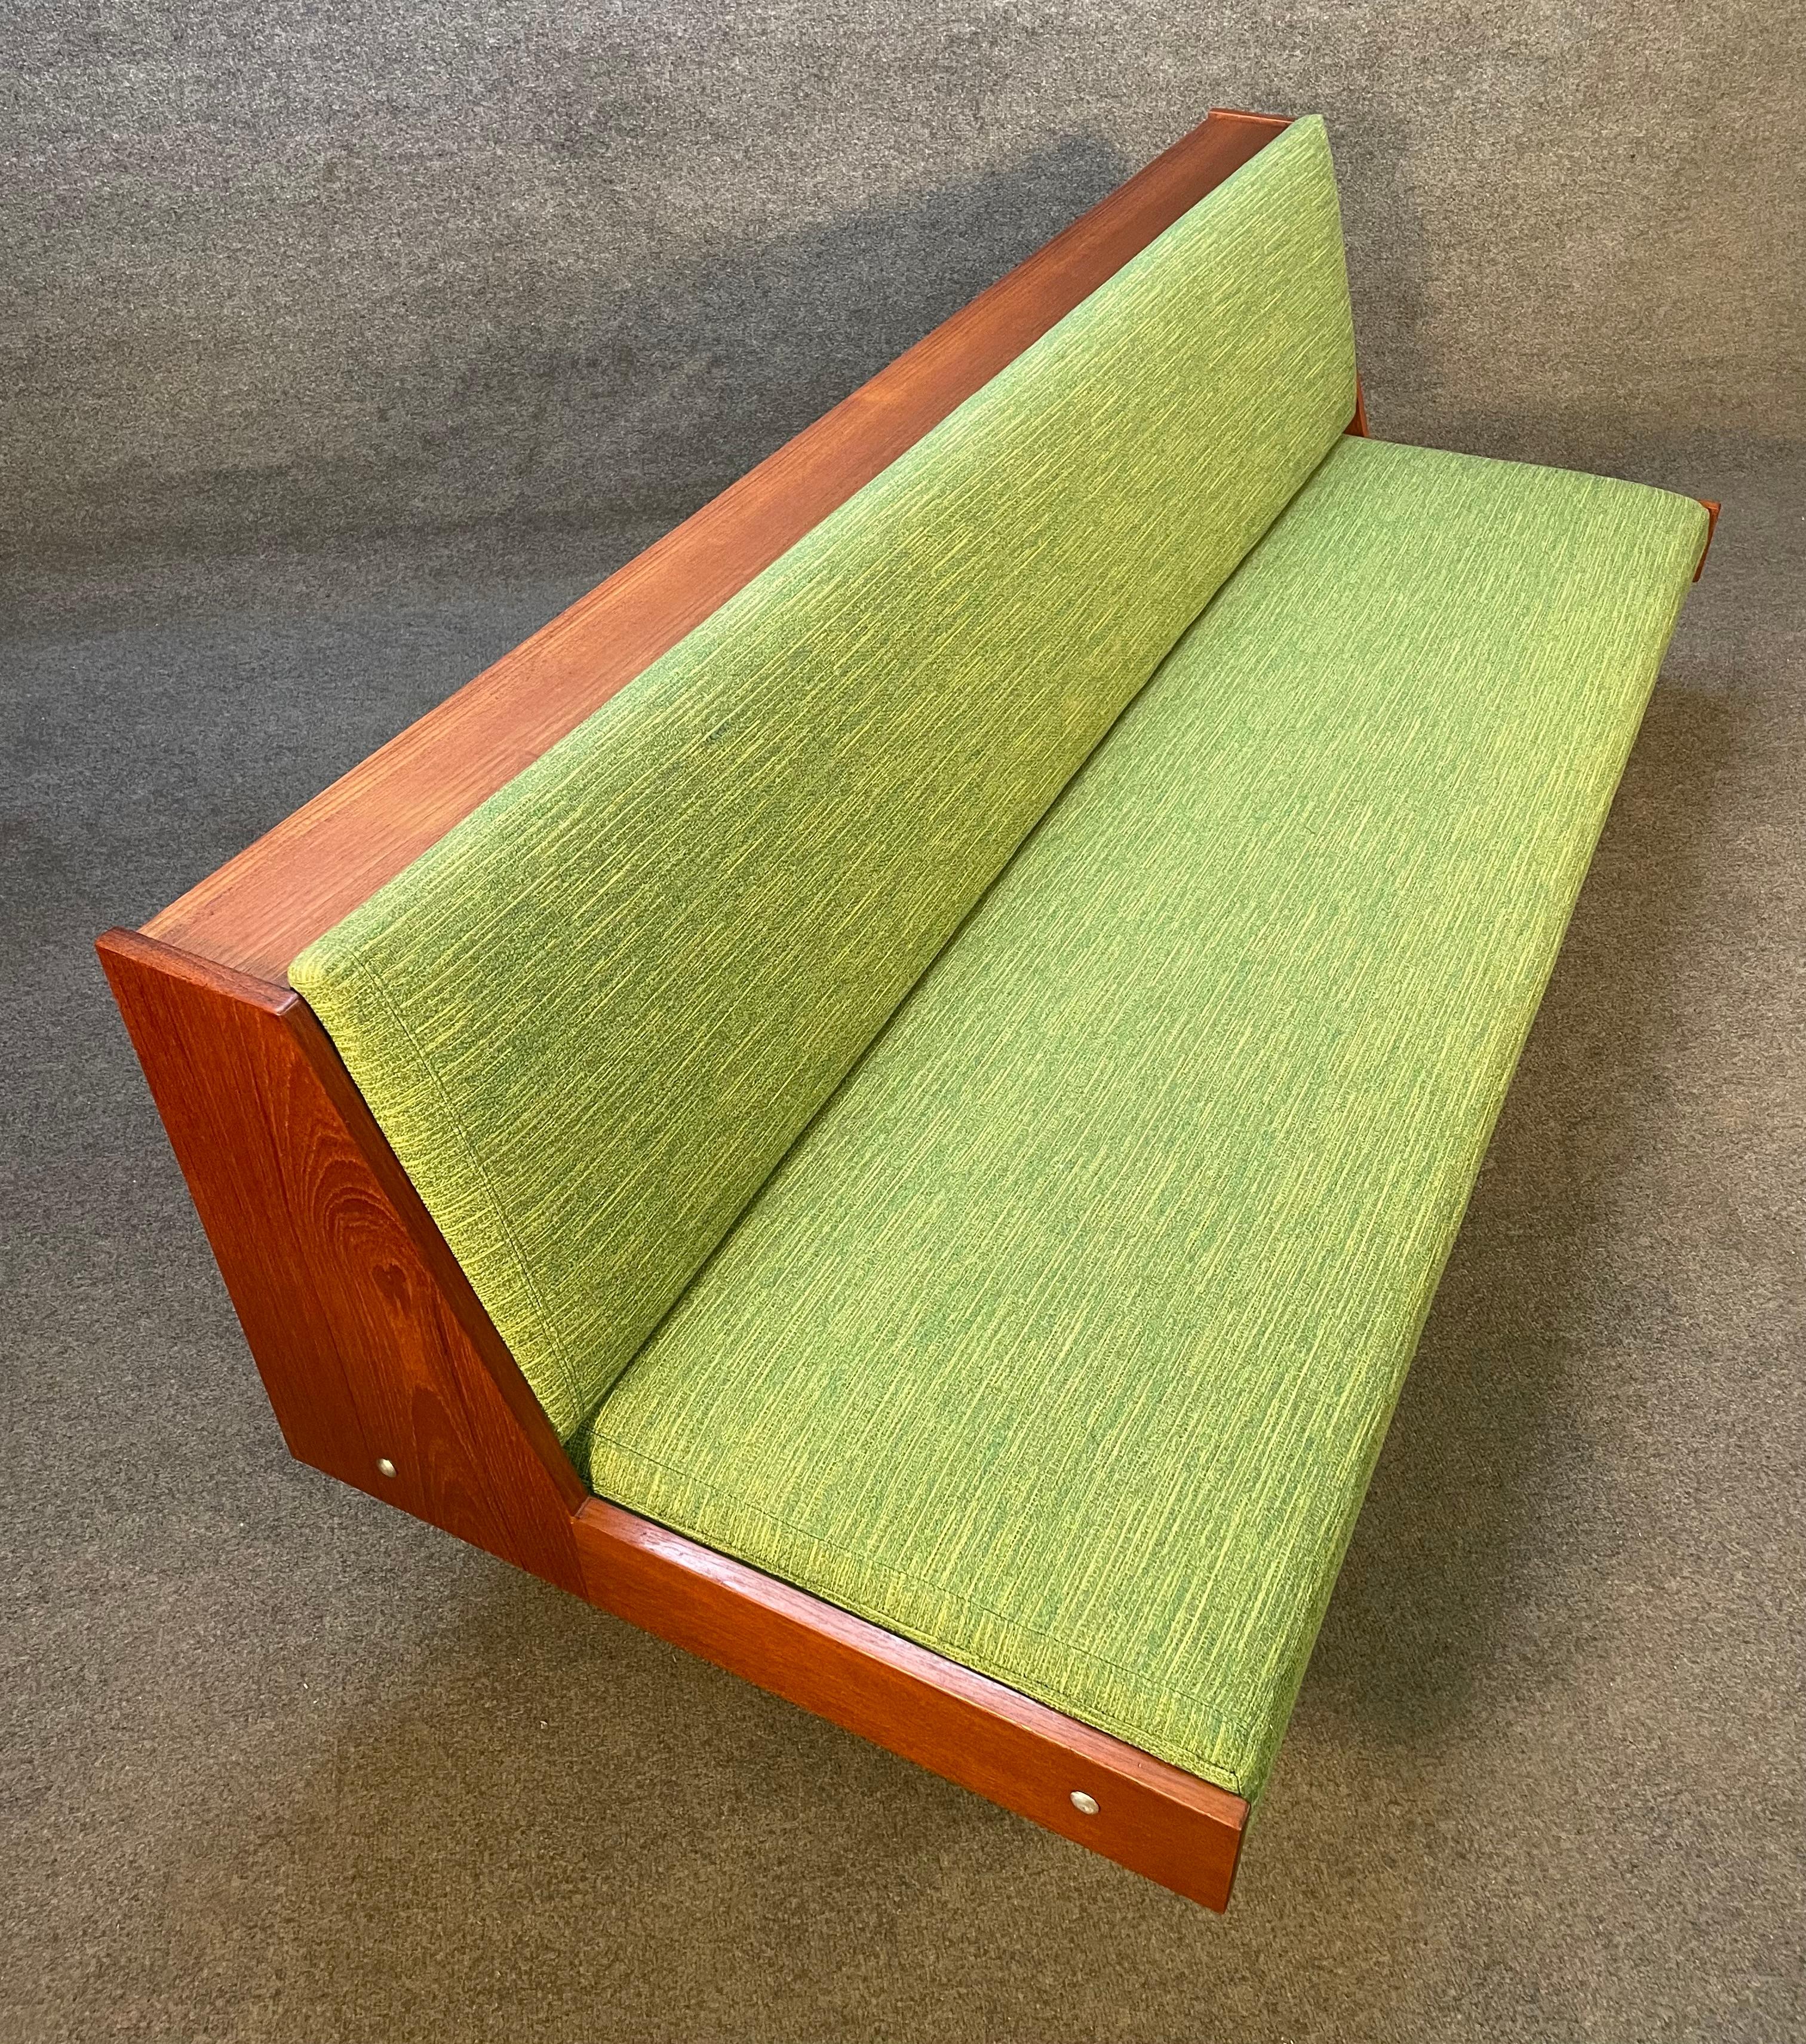 Here is a beautiful 1960's scandinavian modern daybed in teak wood in the manner of Hans Wegner for Getama.
This exquisite piece, recently imported from Europe to California before its restoration, features a vibrant wood grain, new upholstery new